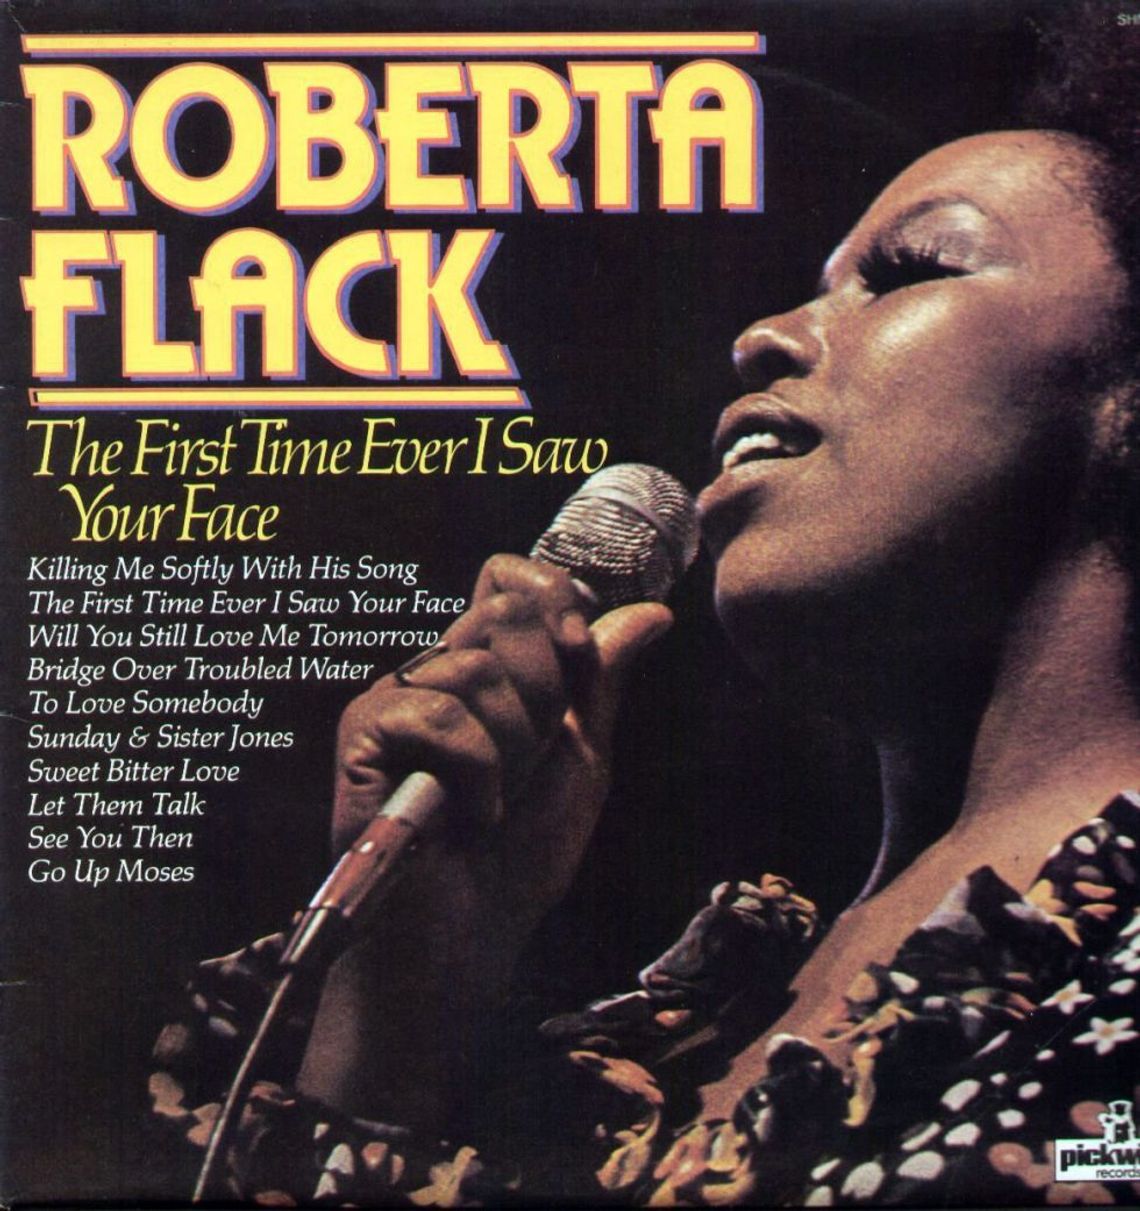 ROBERTA FLACK "The first time ever I saw your face"